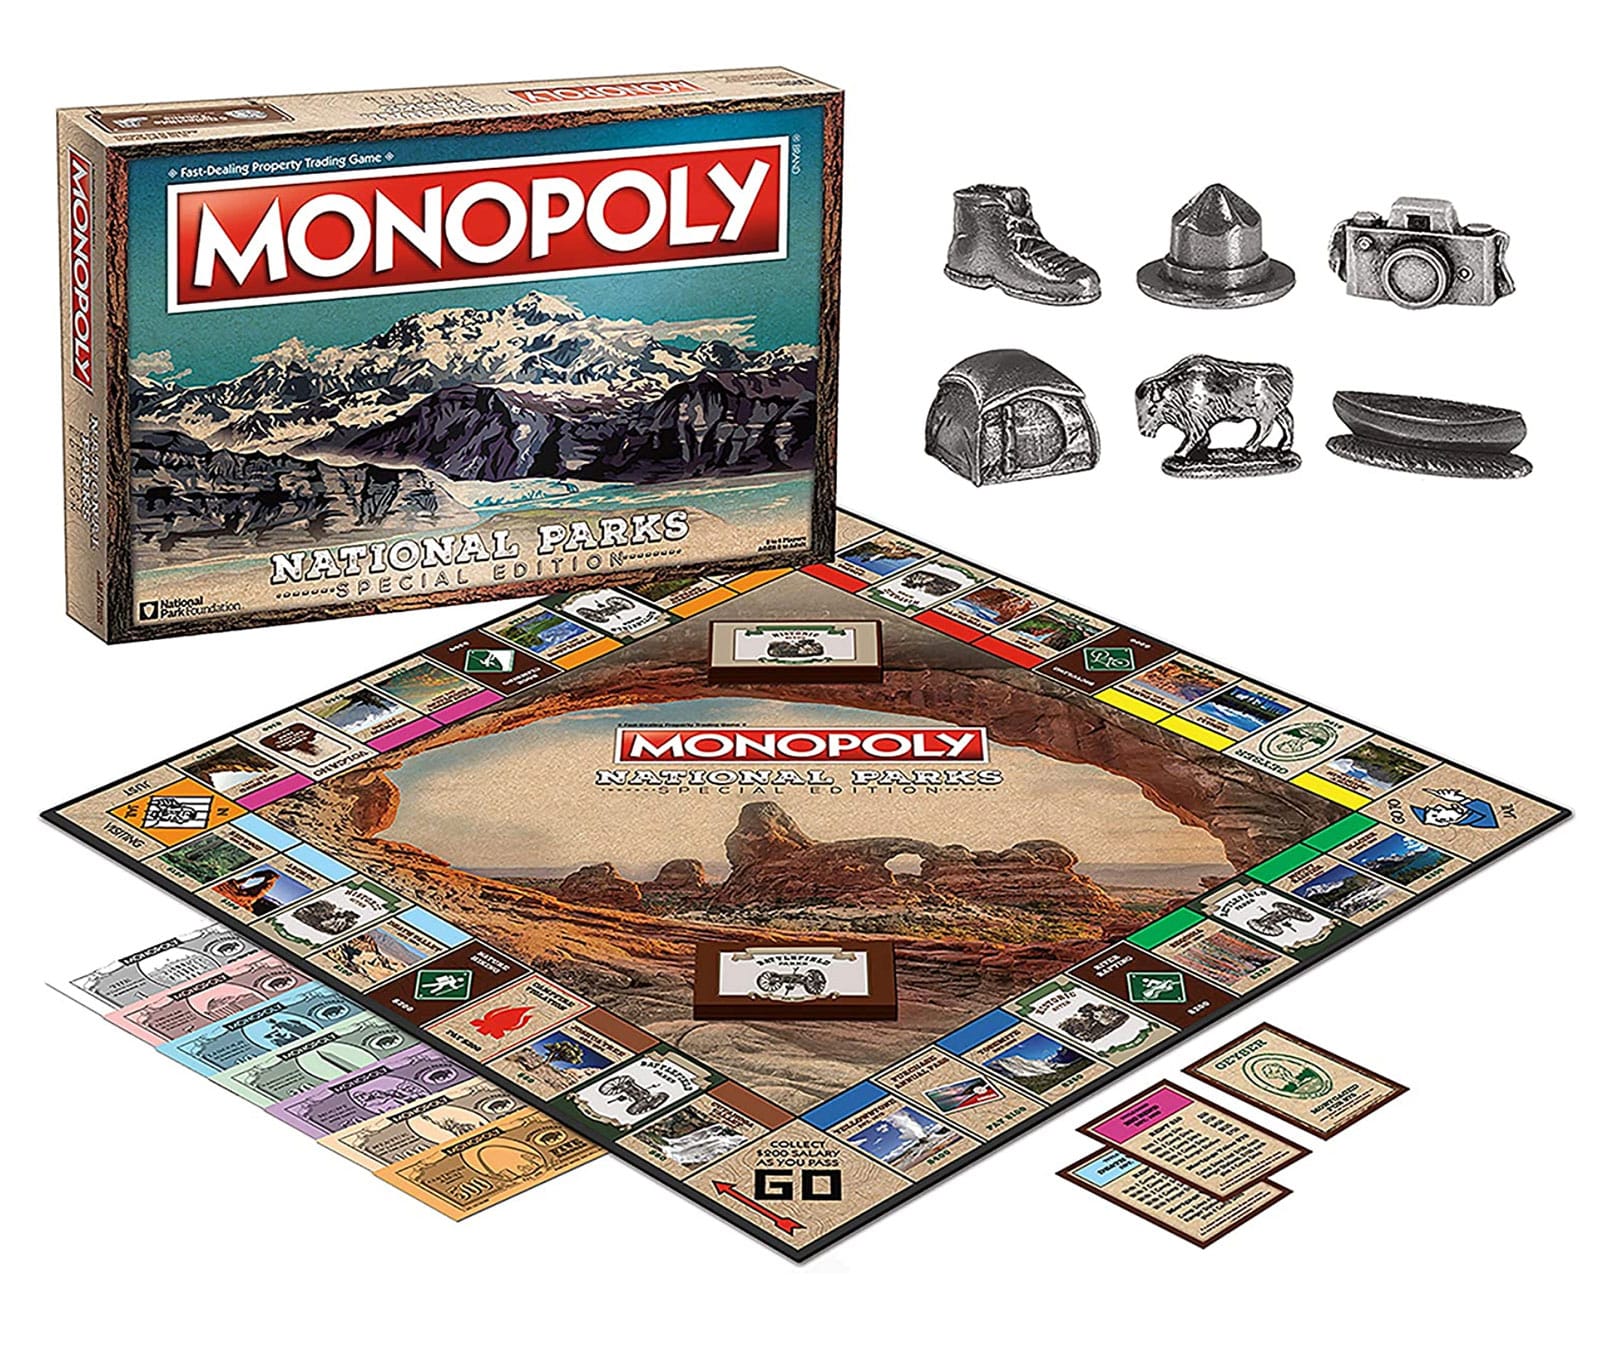 National park special edition of Monopoly